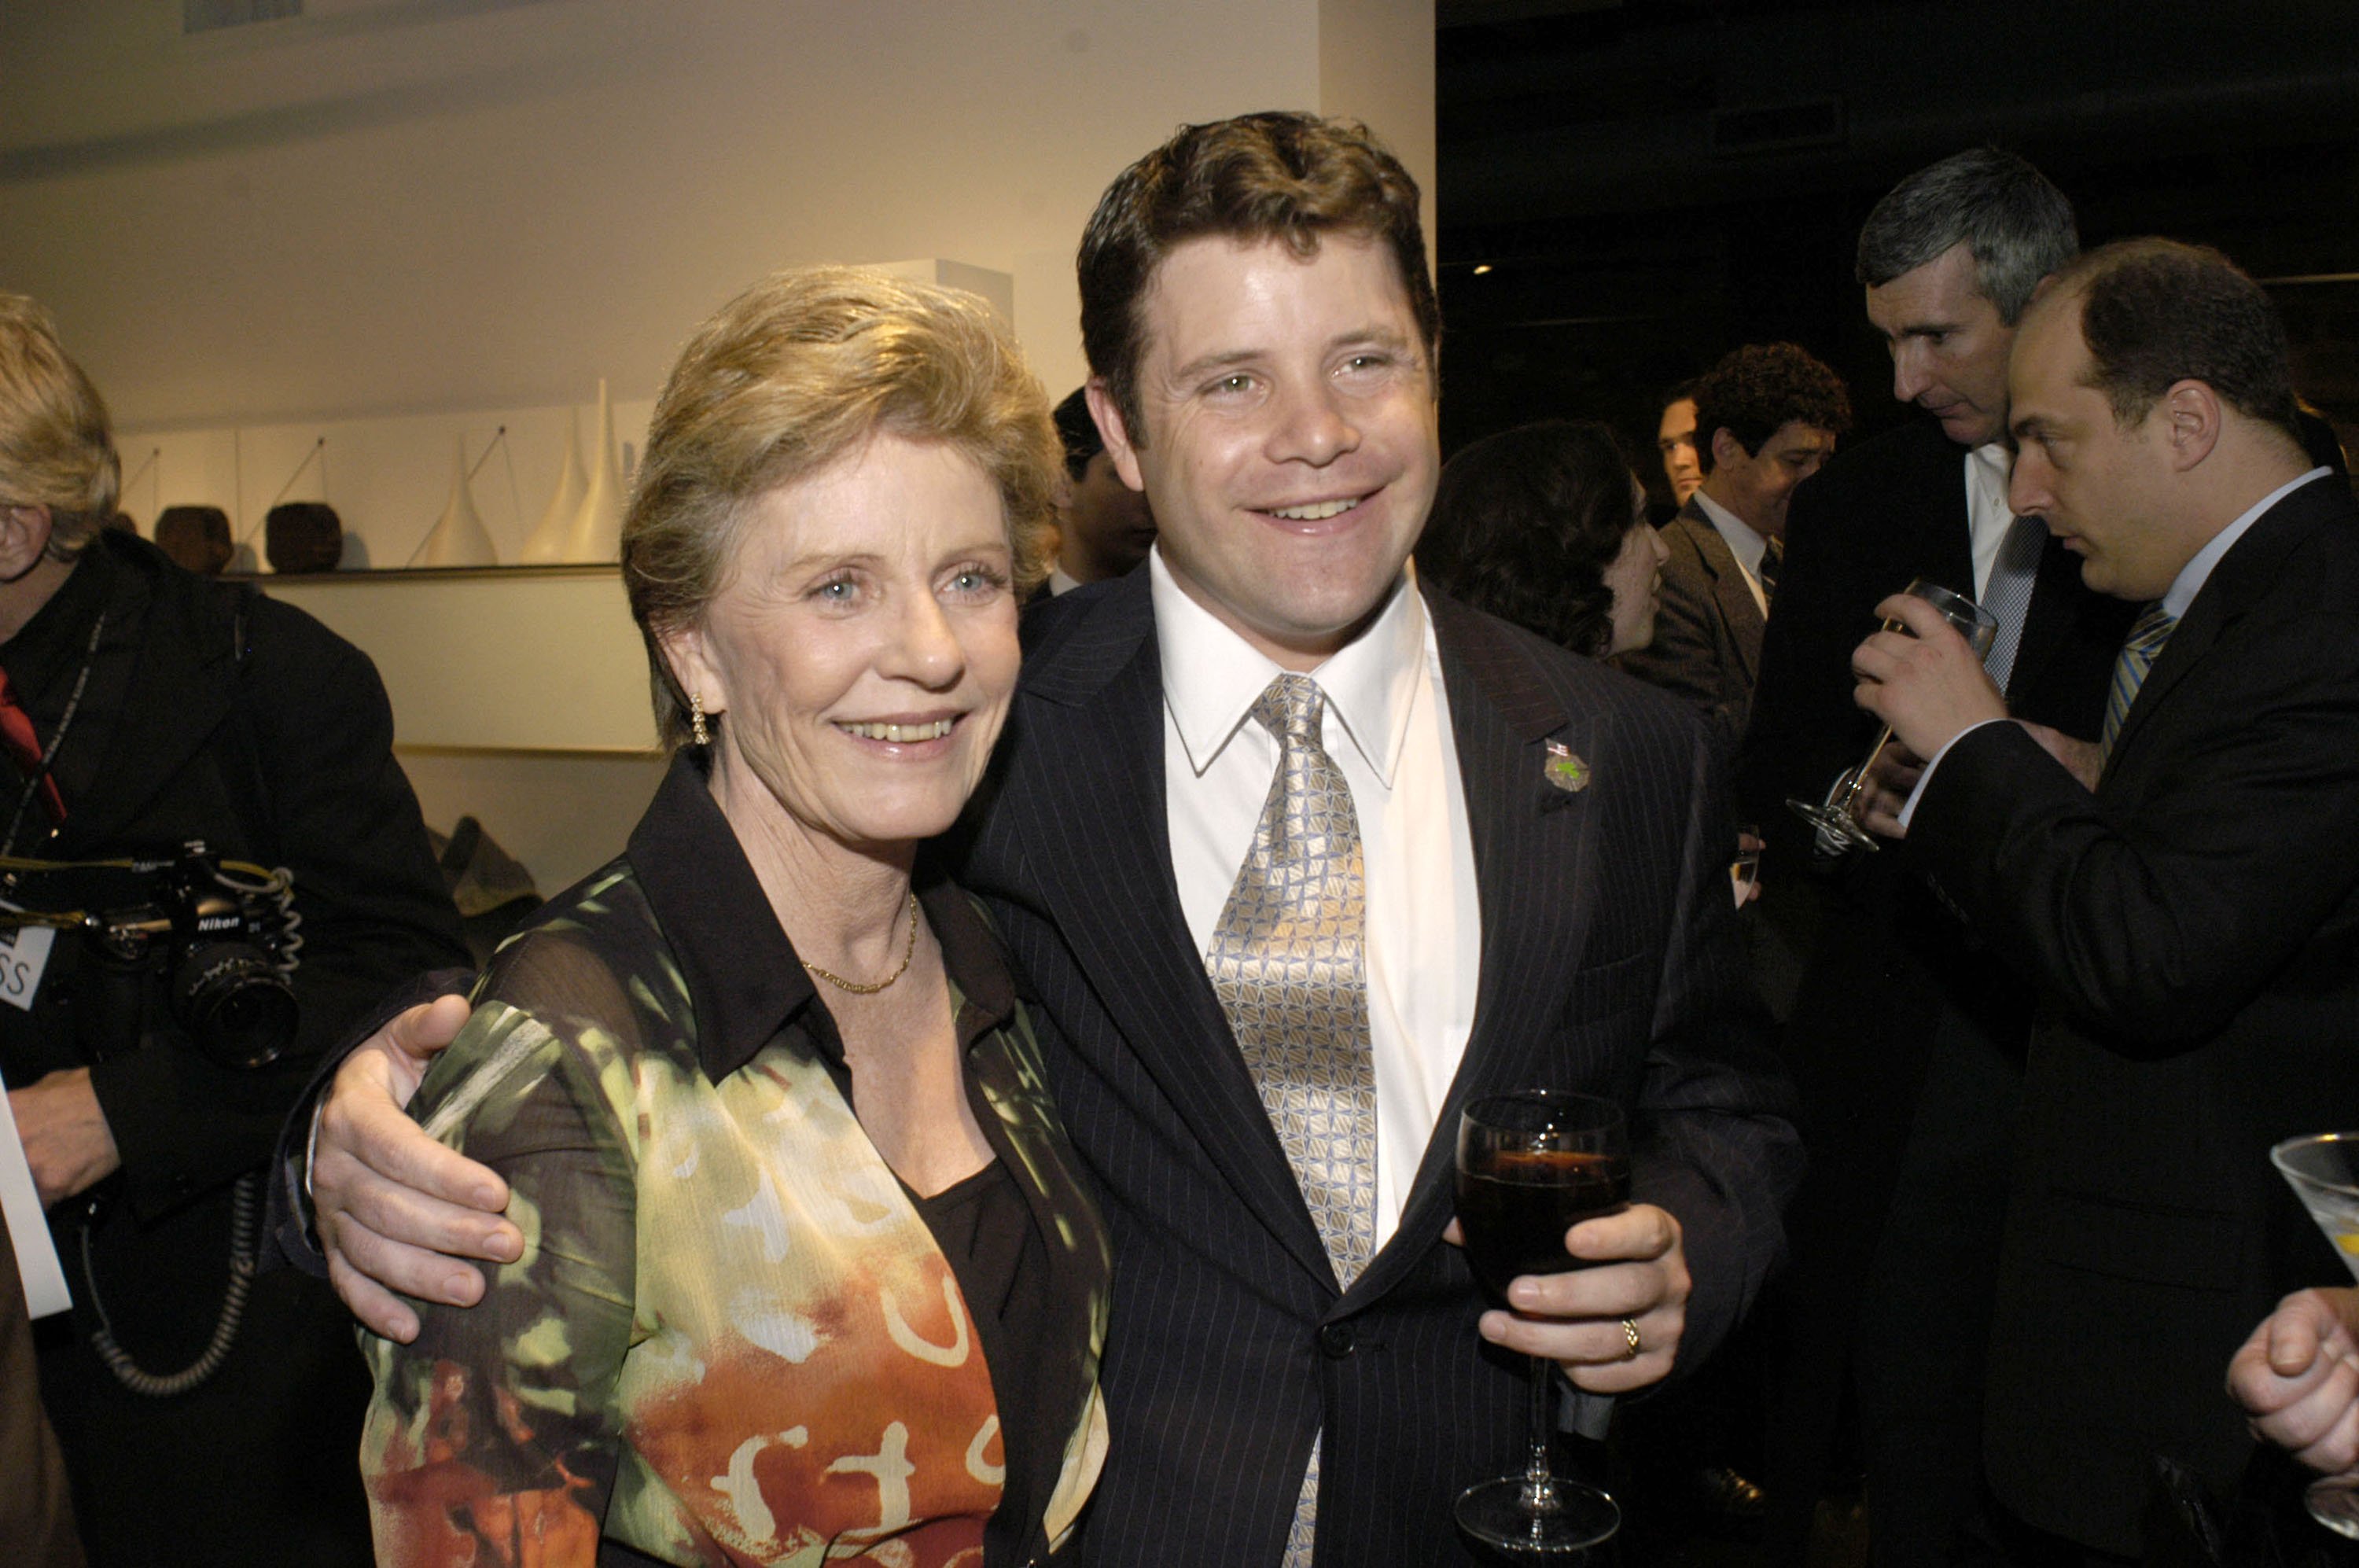 Patty Duke attends the Creative Coalition's 2004 Capitol Hill Spotlight Awards ceremony with her son actor Sean Astin March 30, 2004 in Washington, DC. | Source: Getty Images